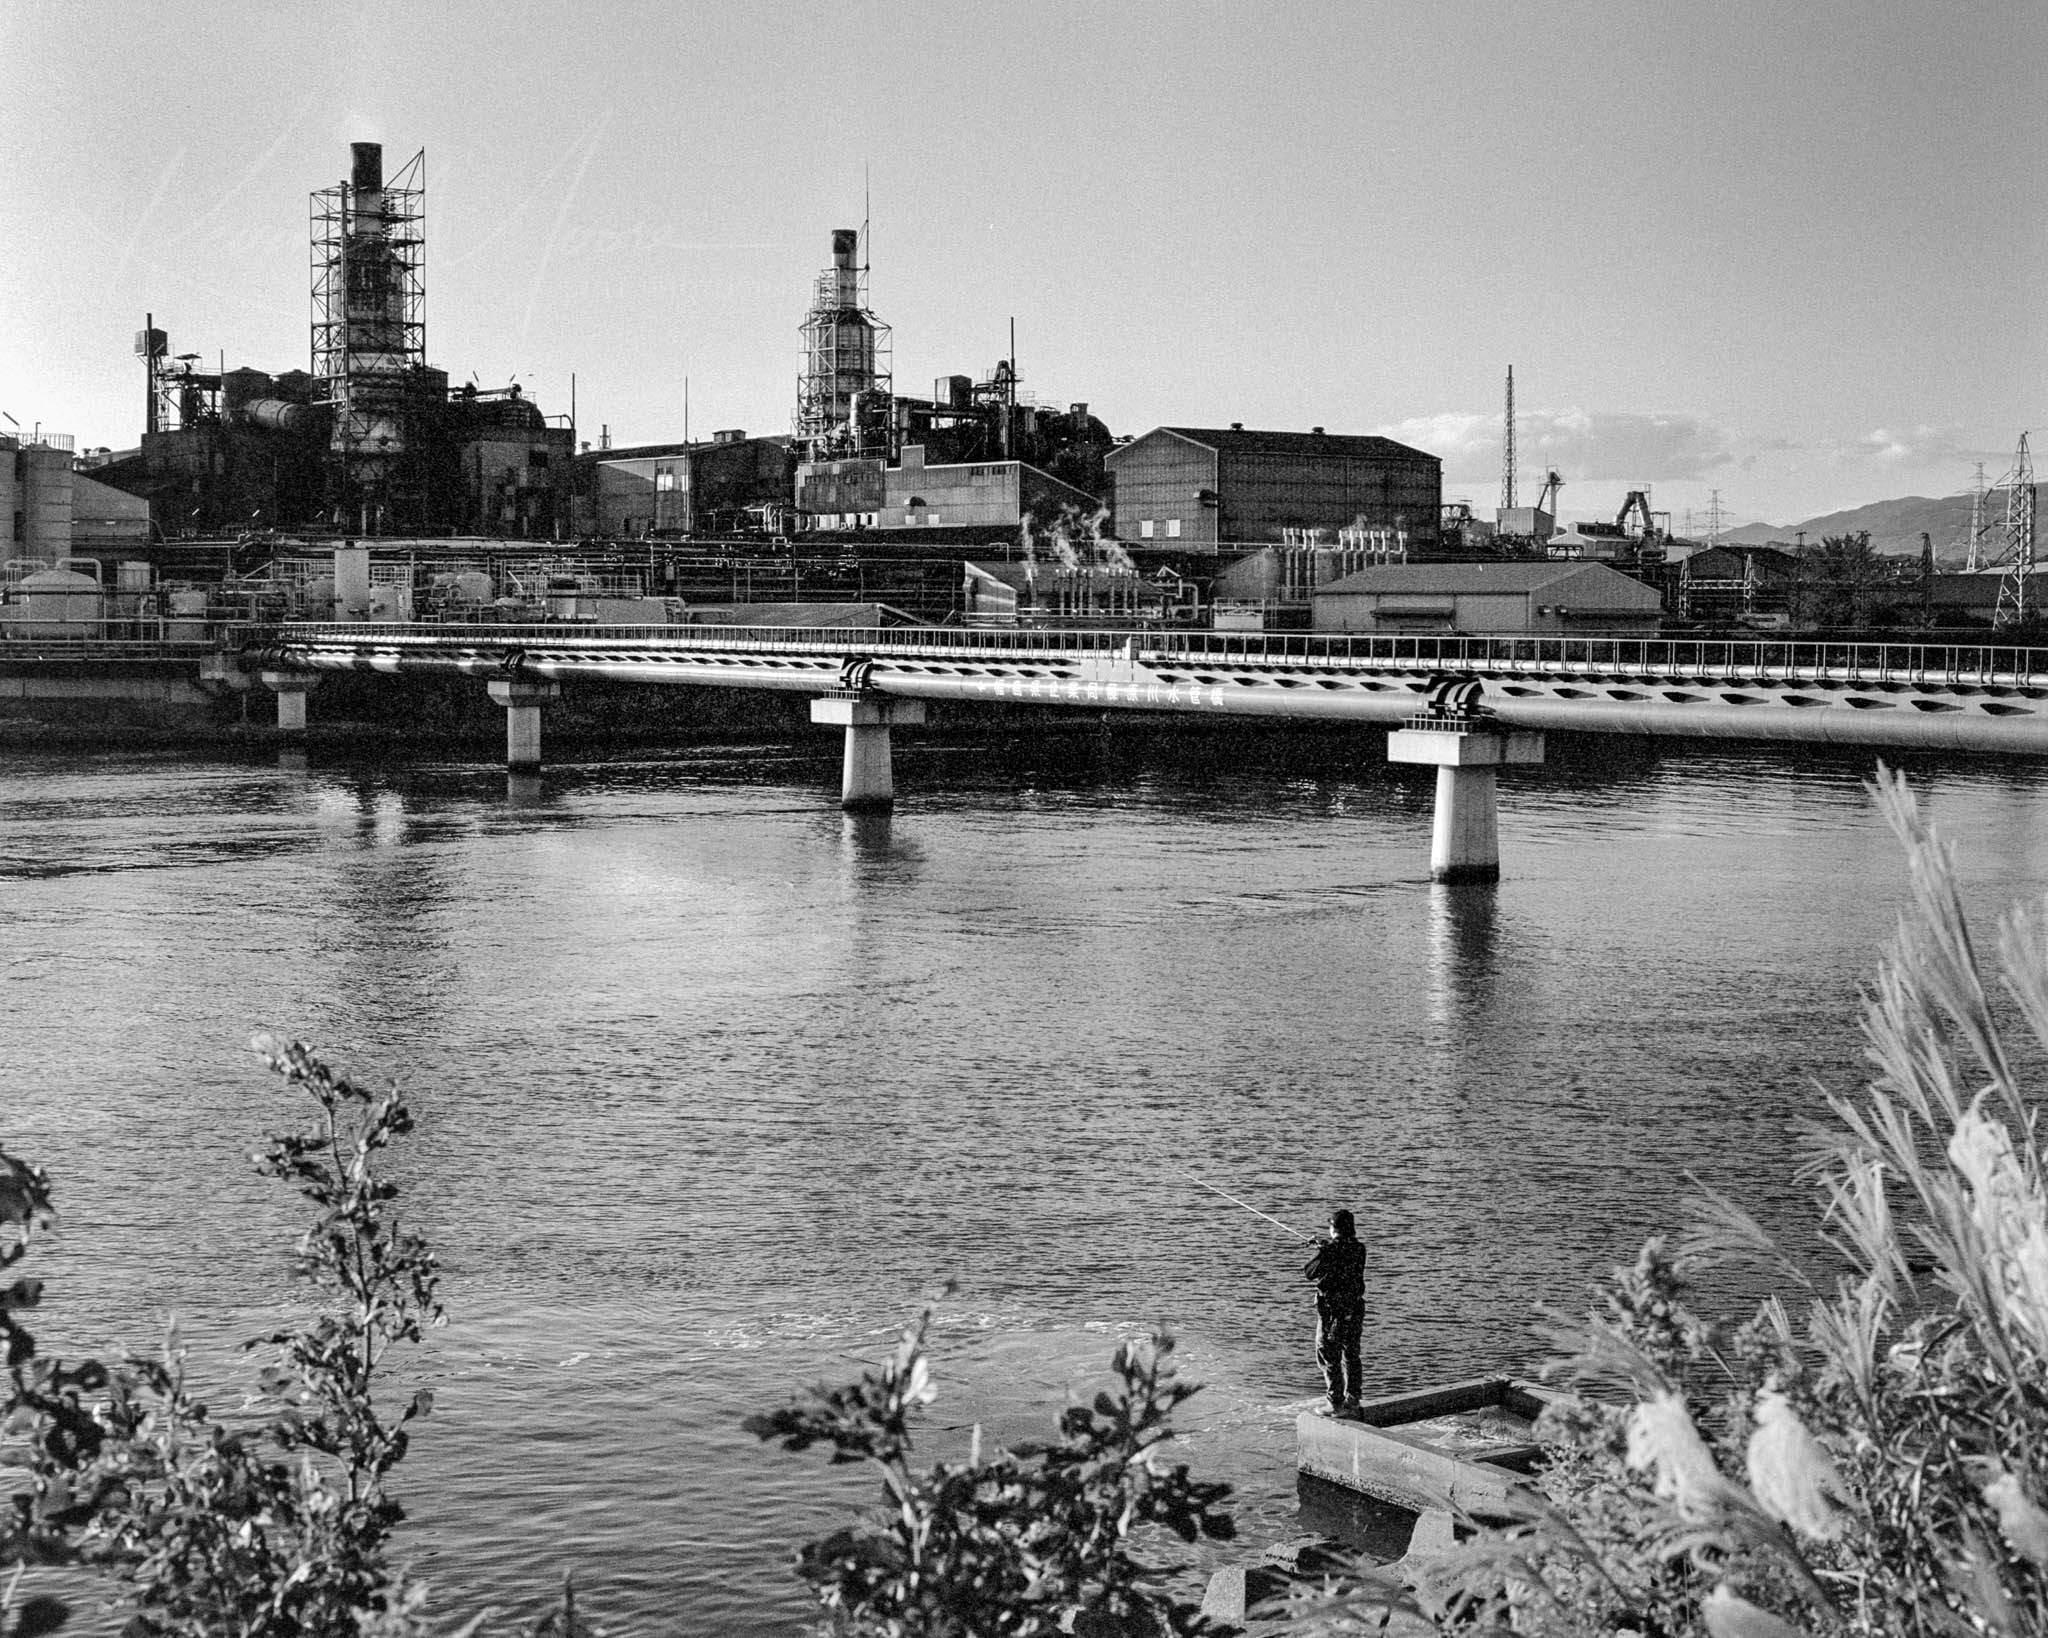 Solitary figure fishing in calm river under an industrial mid-20th century bridge, black and white photo.